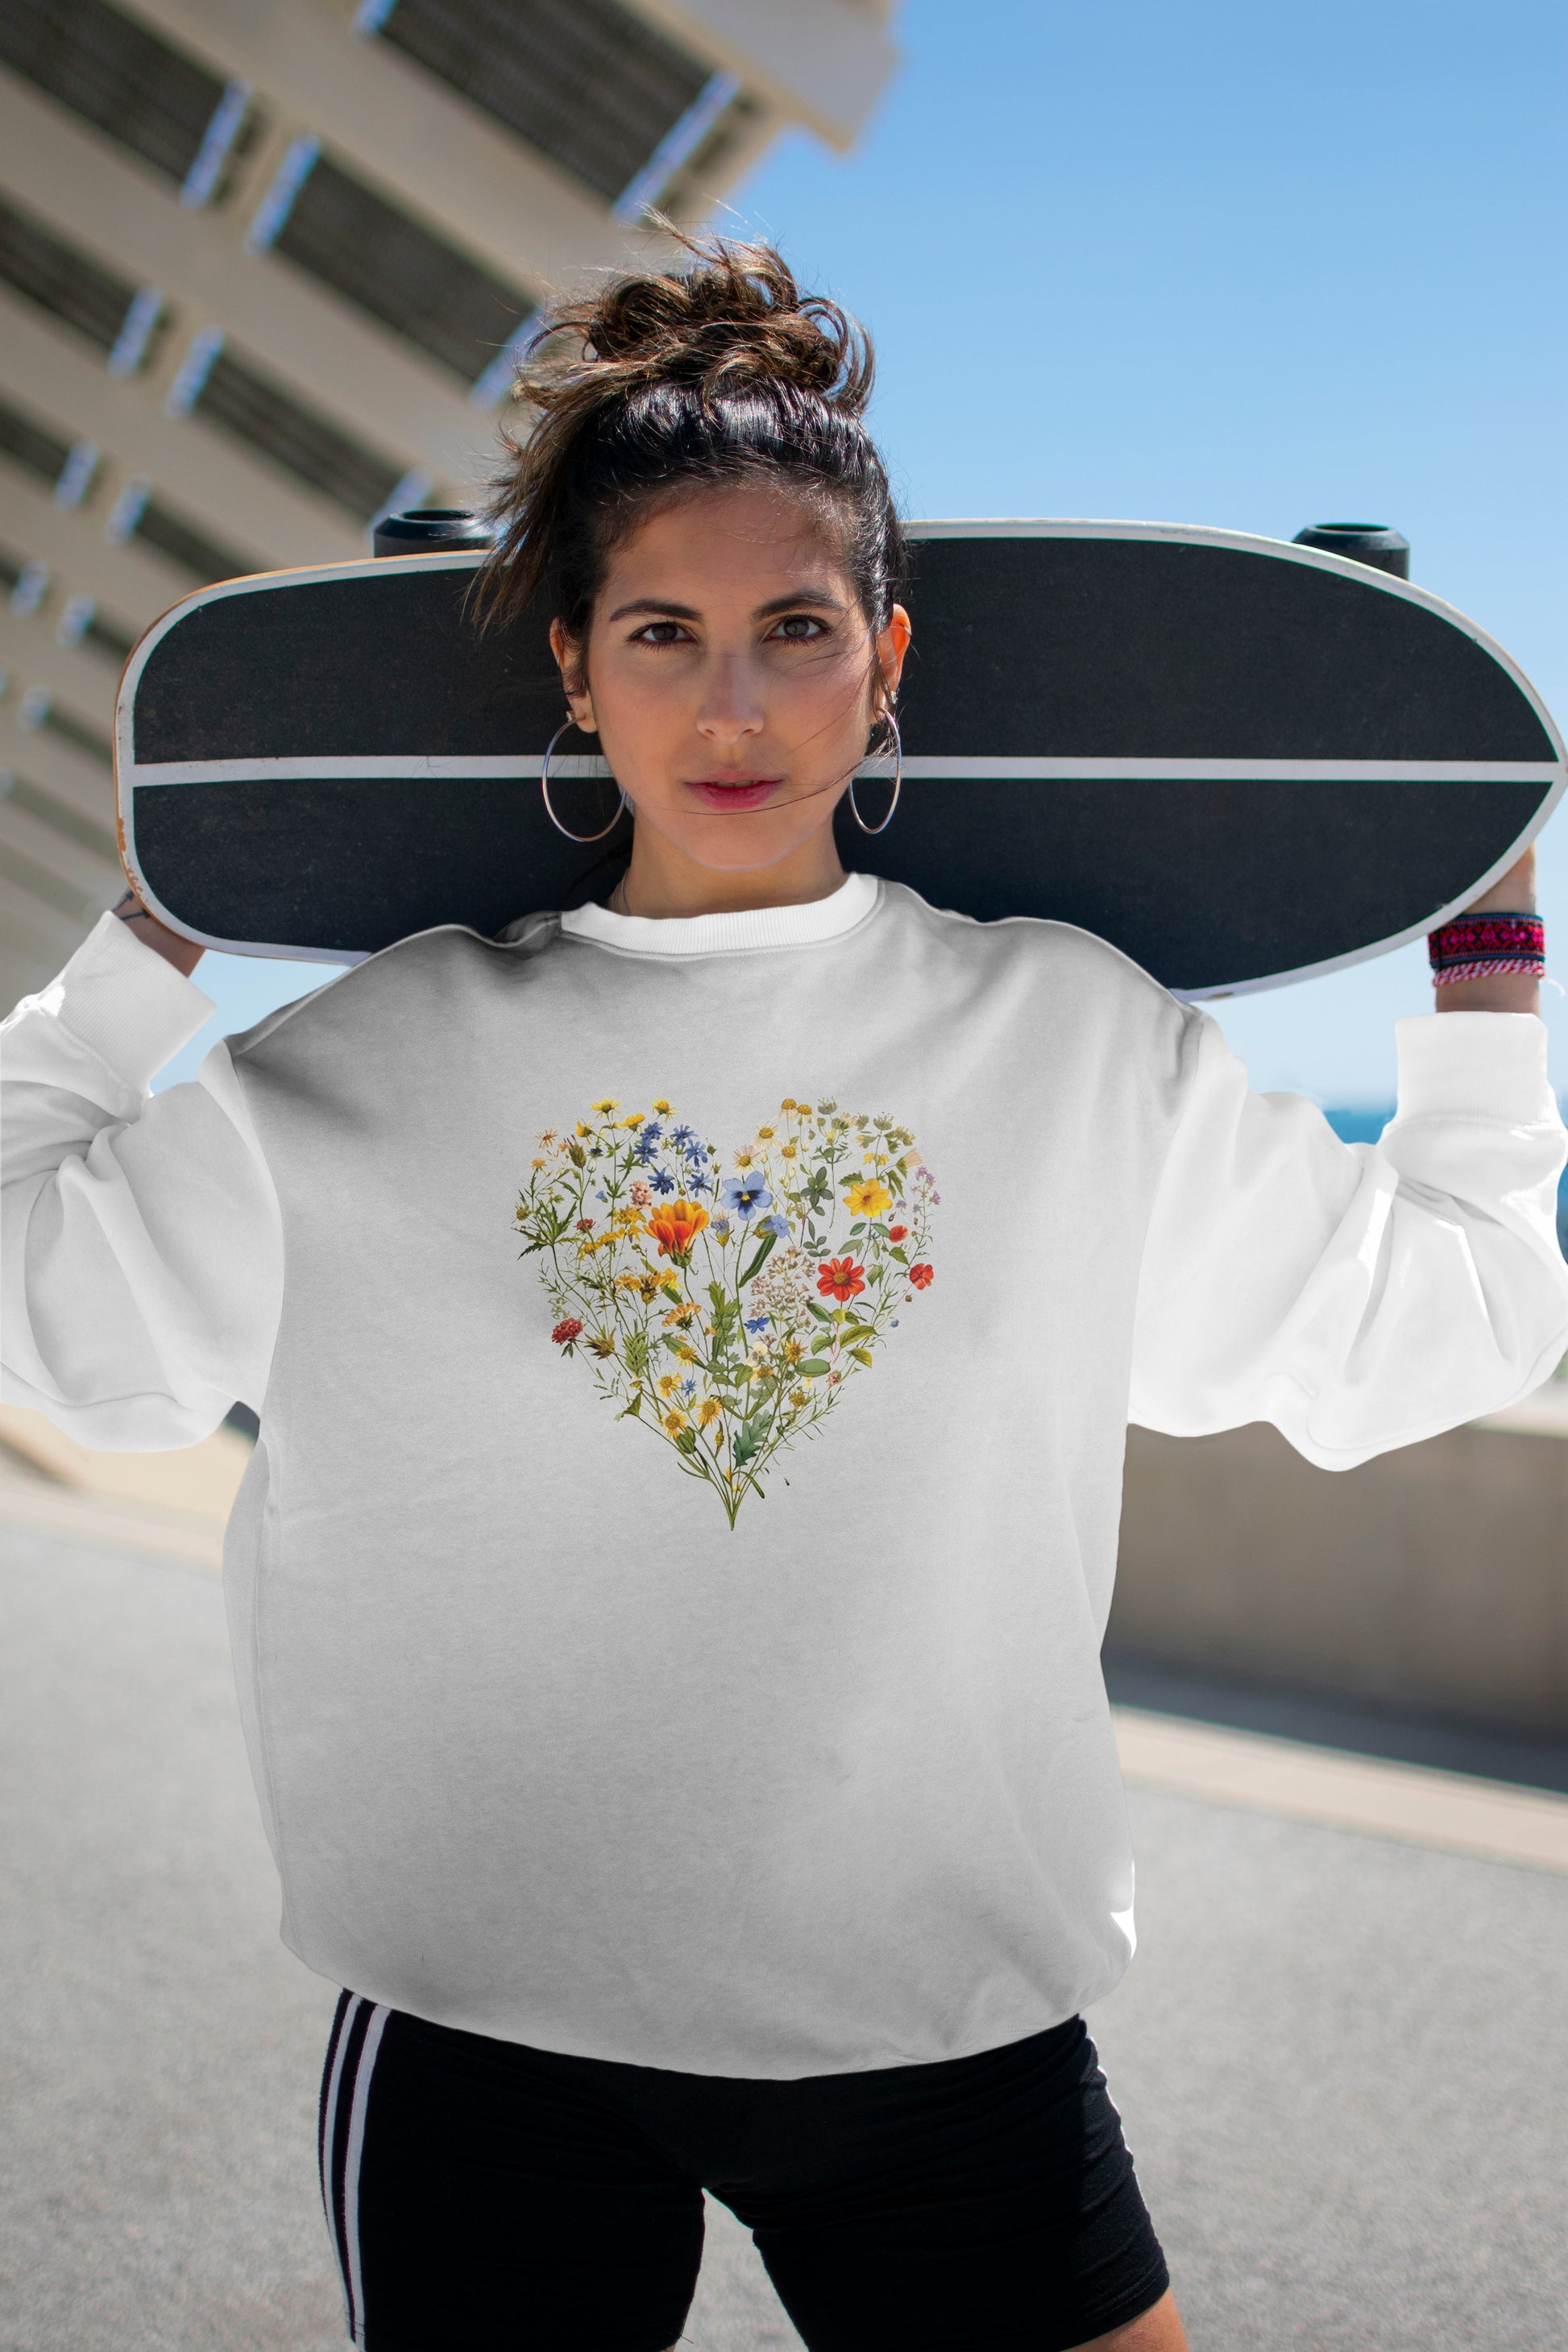 Wild Flowers in Heart Pattern Crewneck Sweatshirt | Branch and Stick Branch and Stick